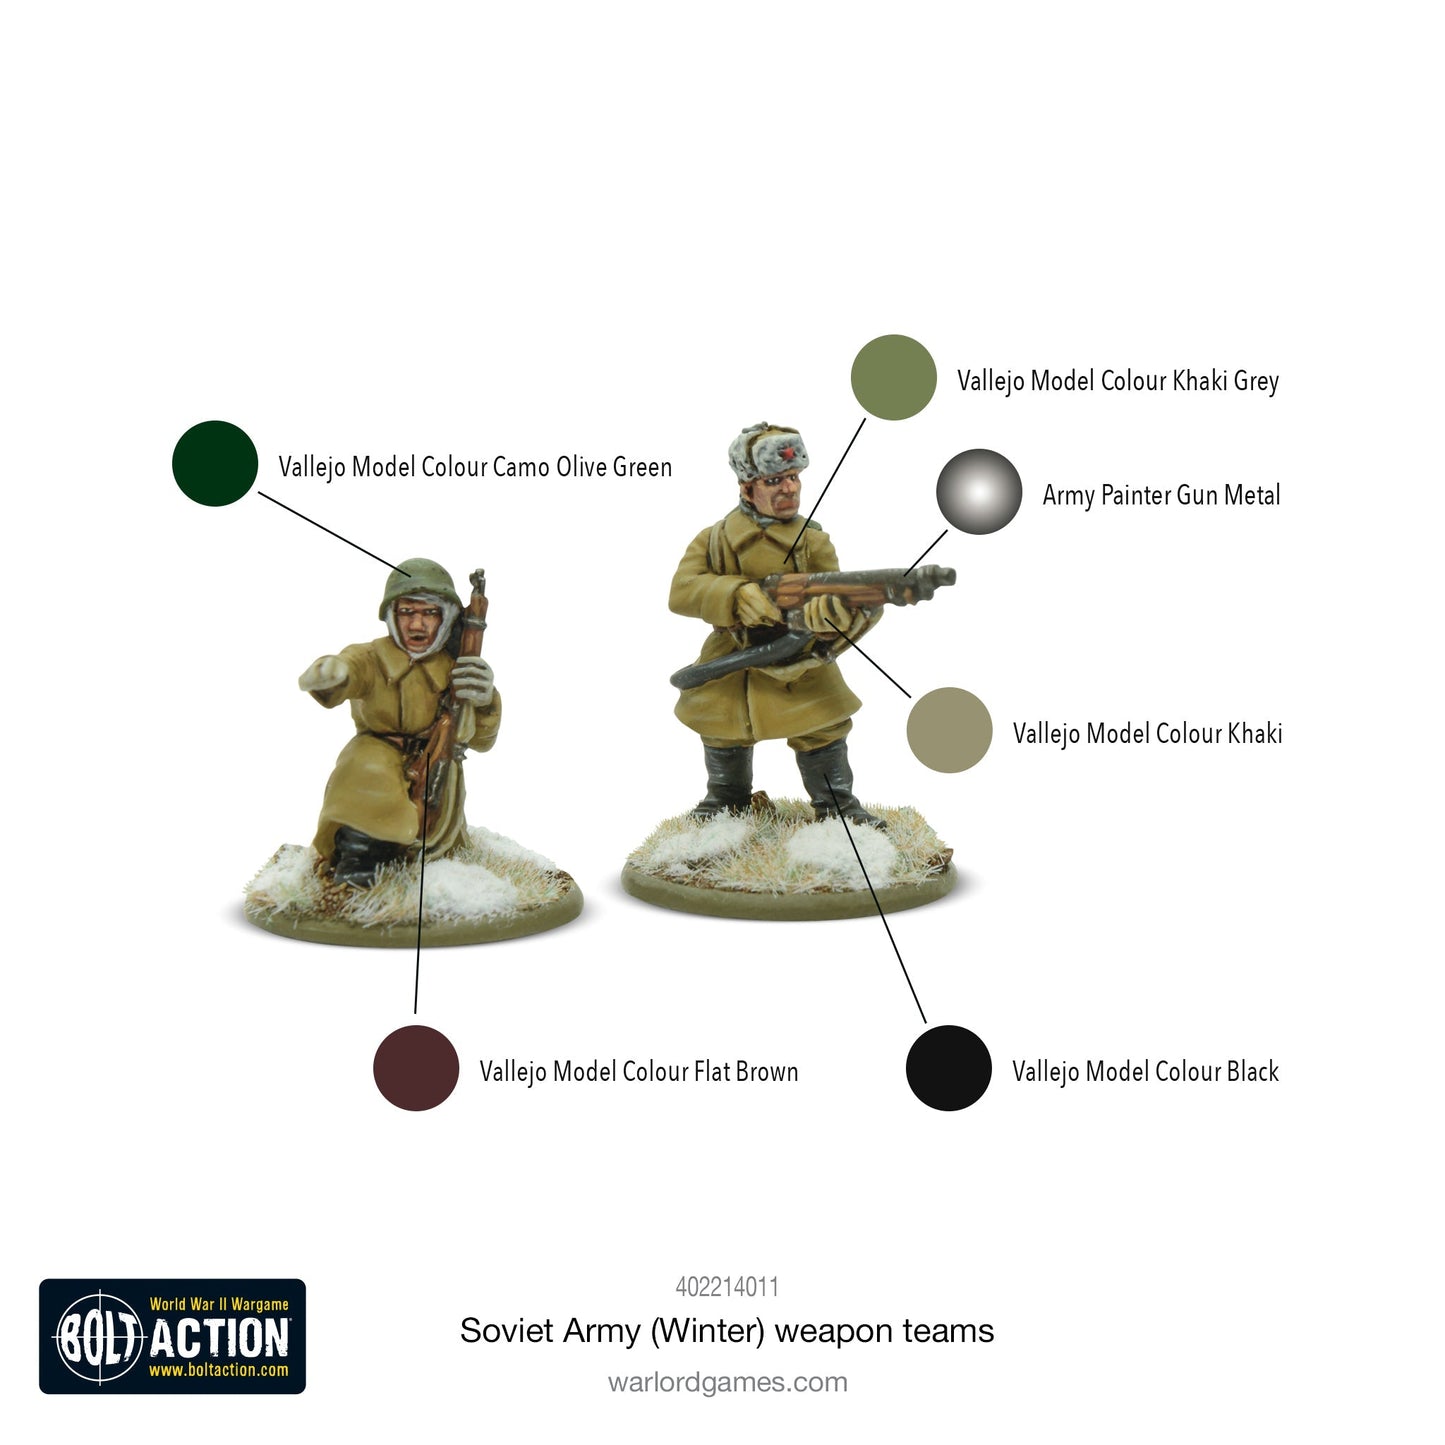 Bolt Action - Soviet Union: Soviet Army (Winter) Weapons Teams